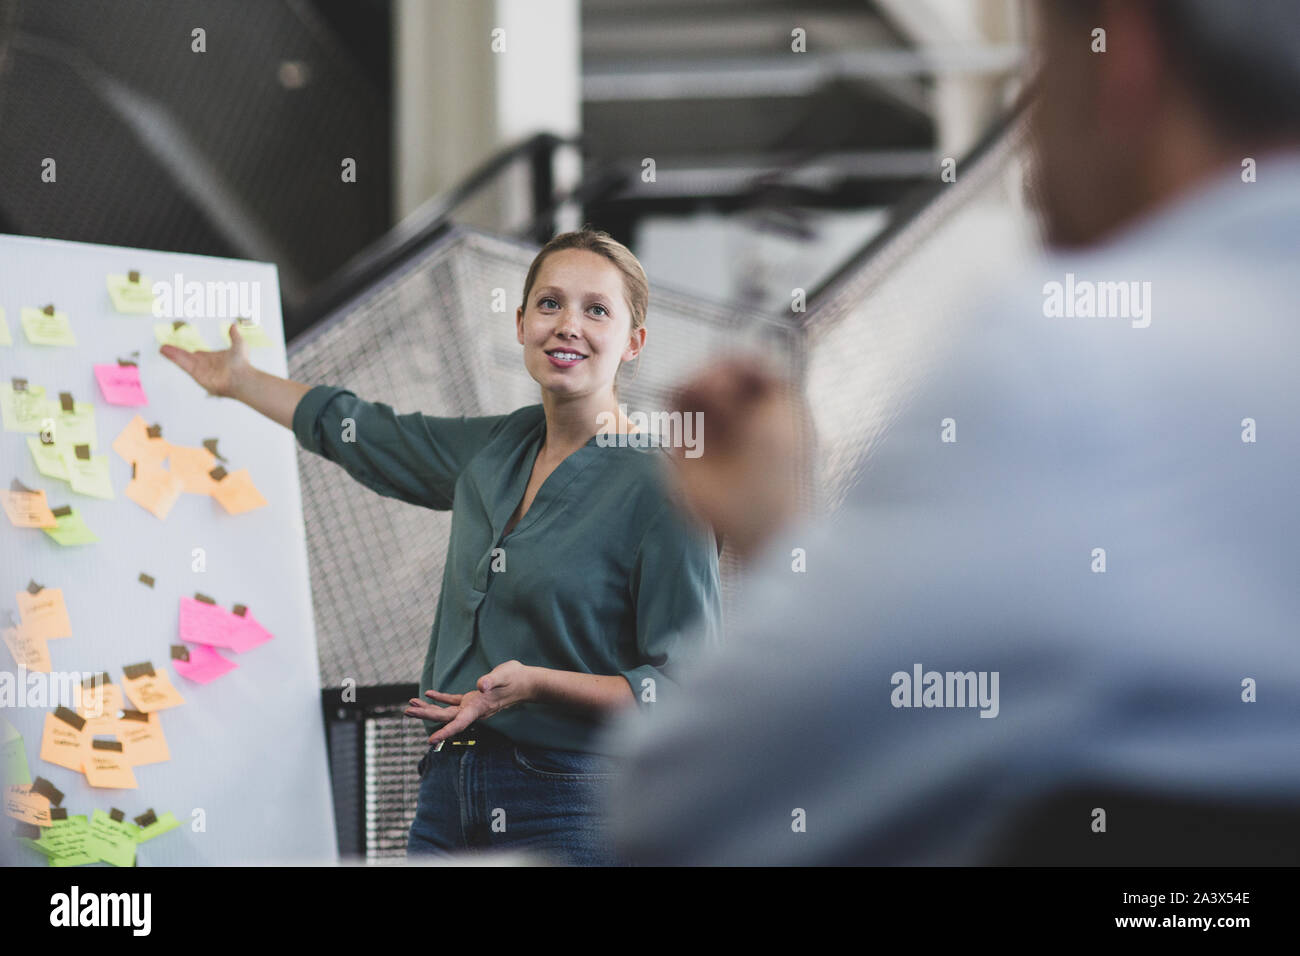 Female executive holding a brainstorm meeting Stock Photo